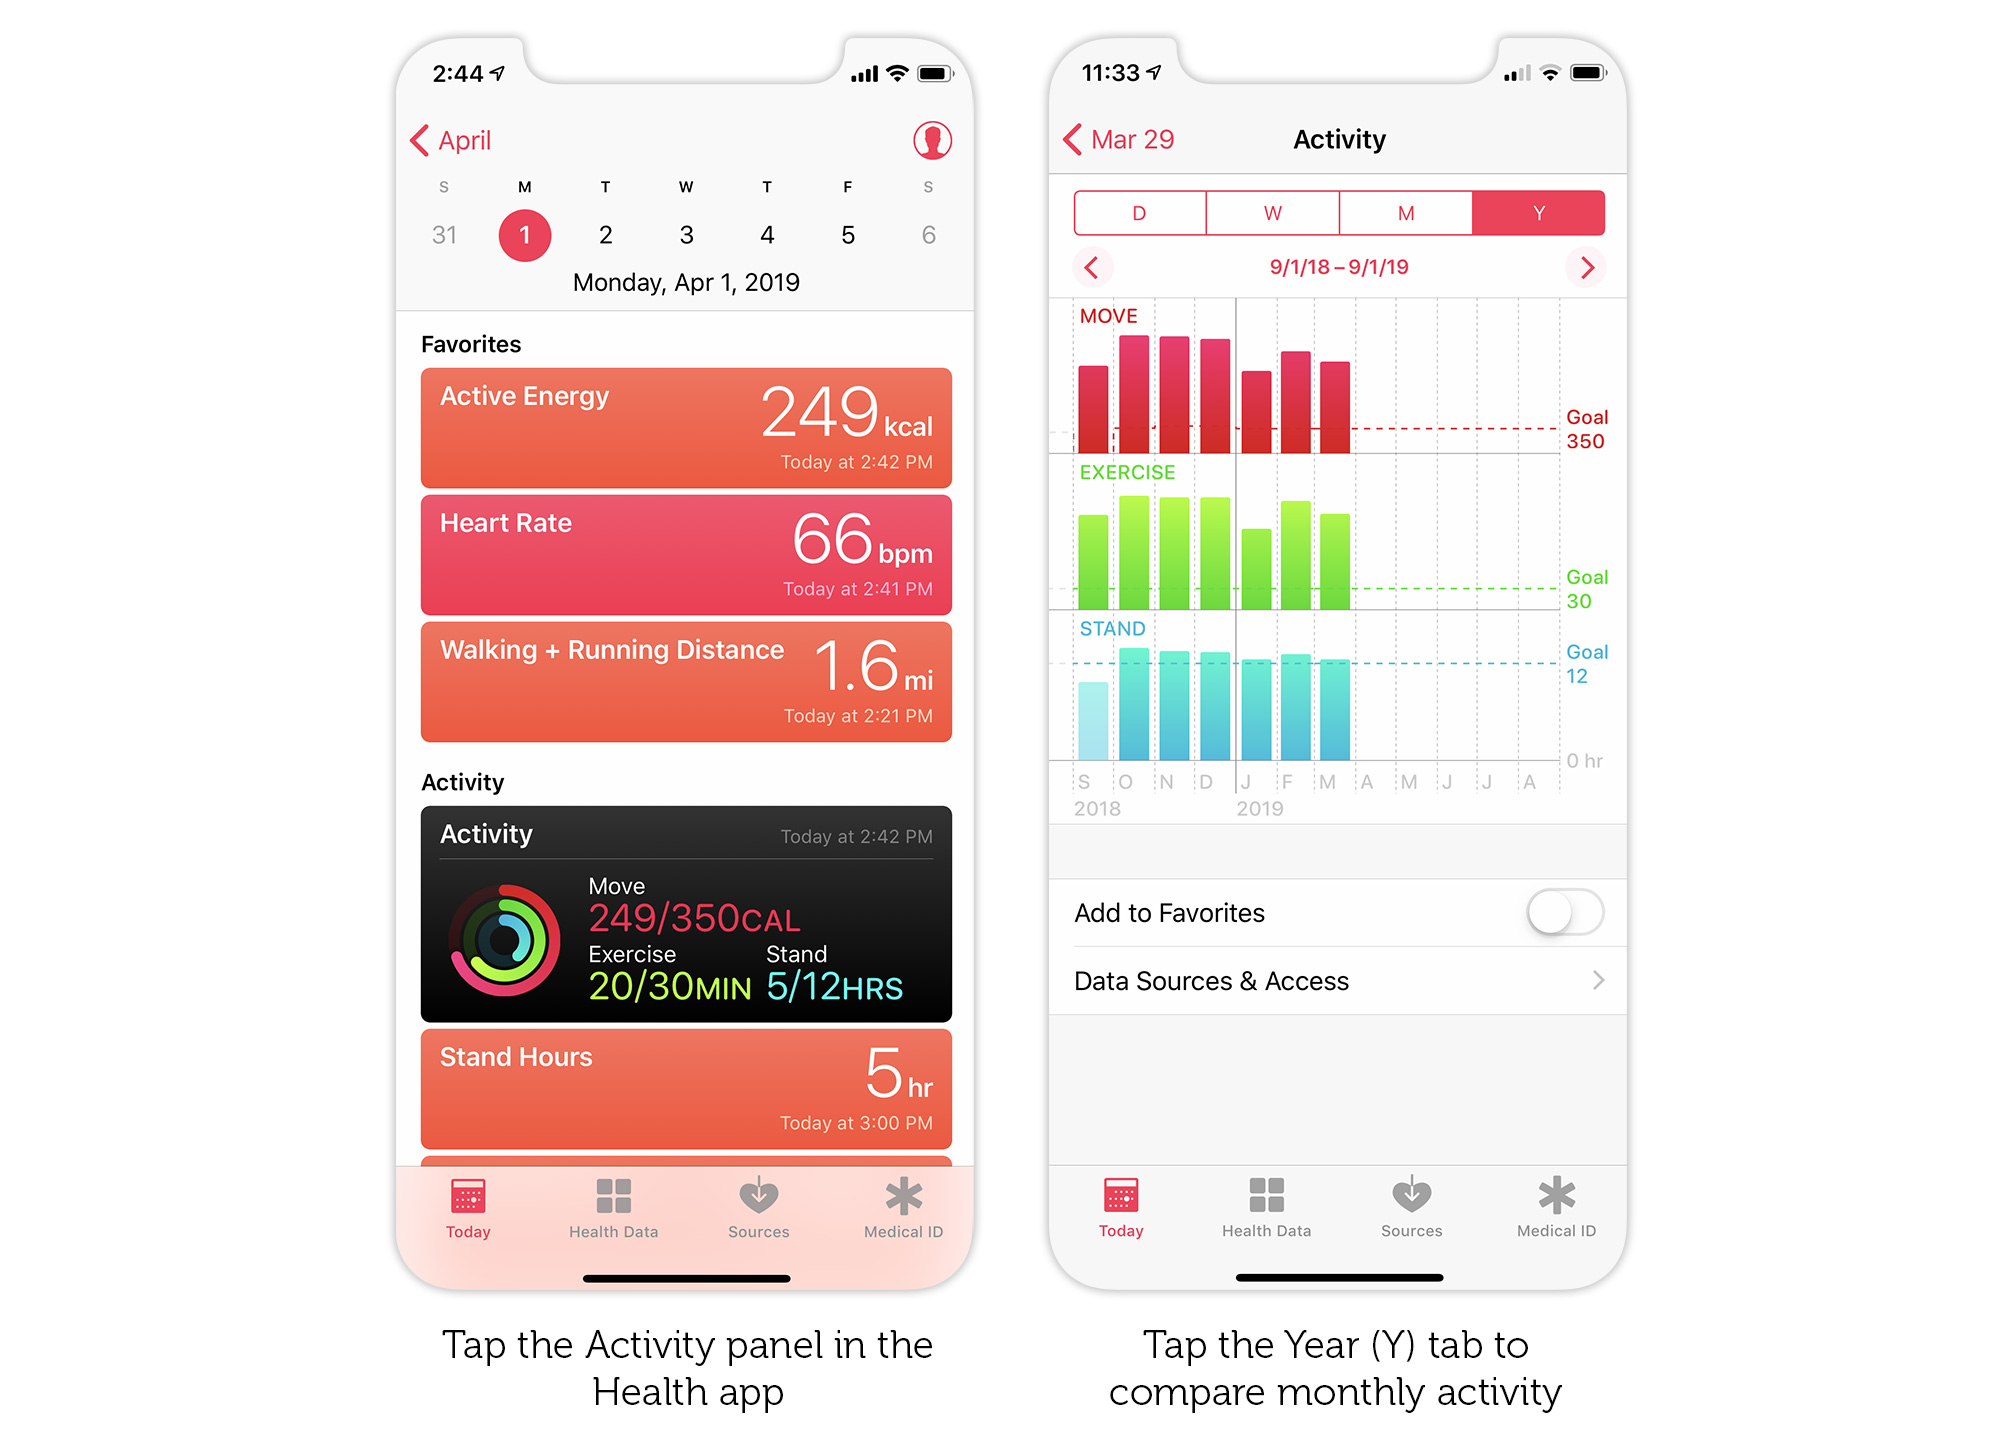 How to view activity by month and year in the Apple Health app.